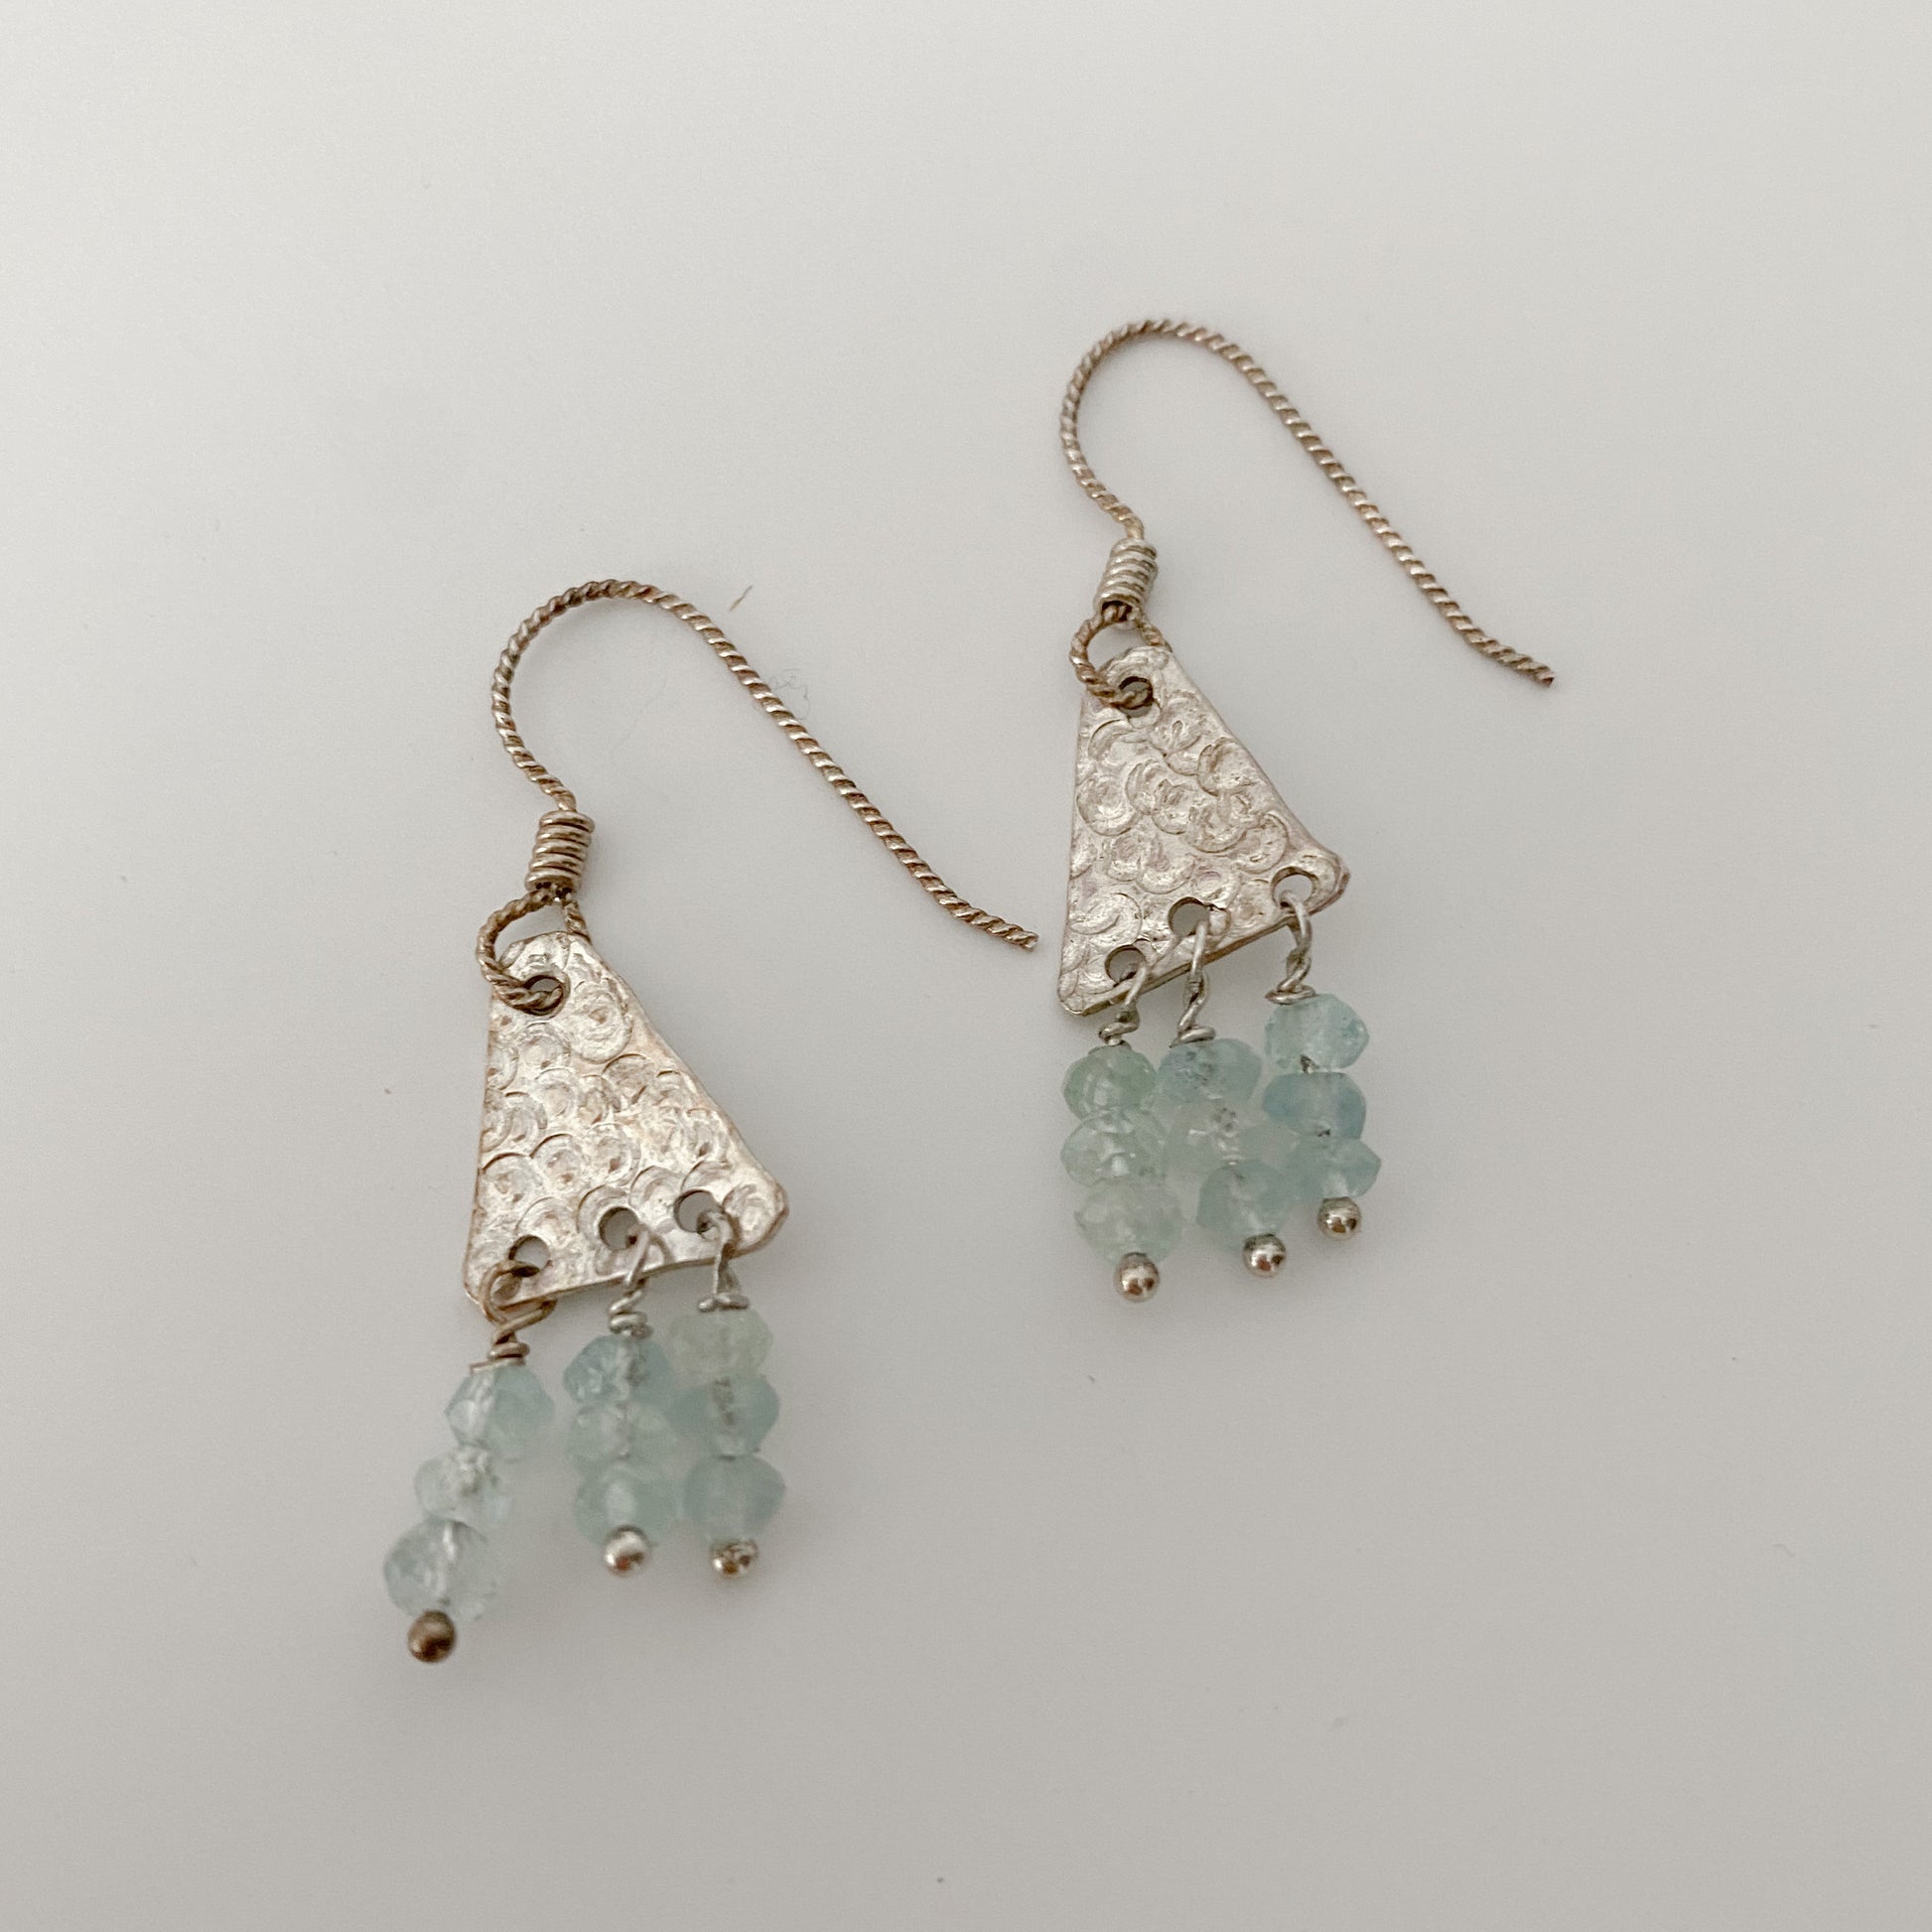 Delicate Dangles -Sterling Silver Earring dangles with faceted aquamarines - Aprilierre